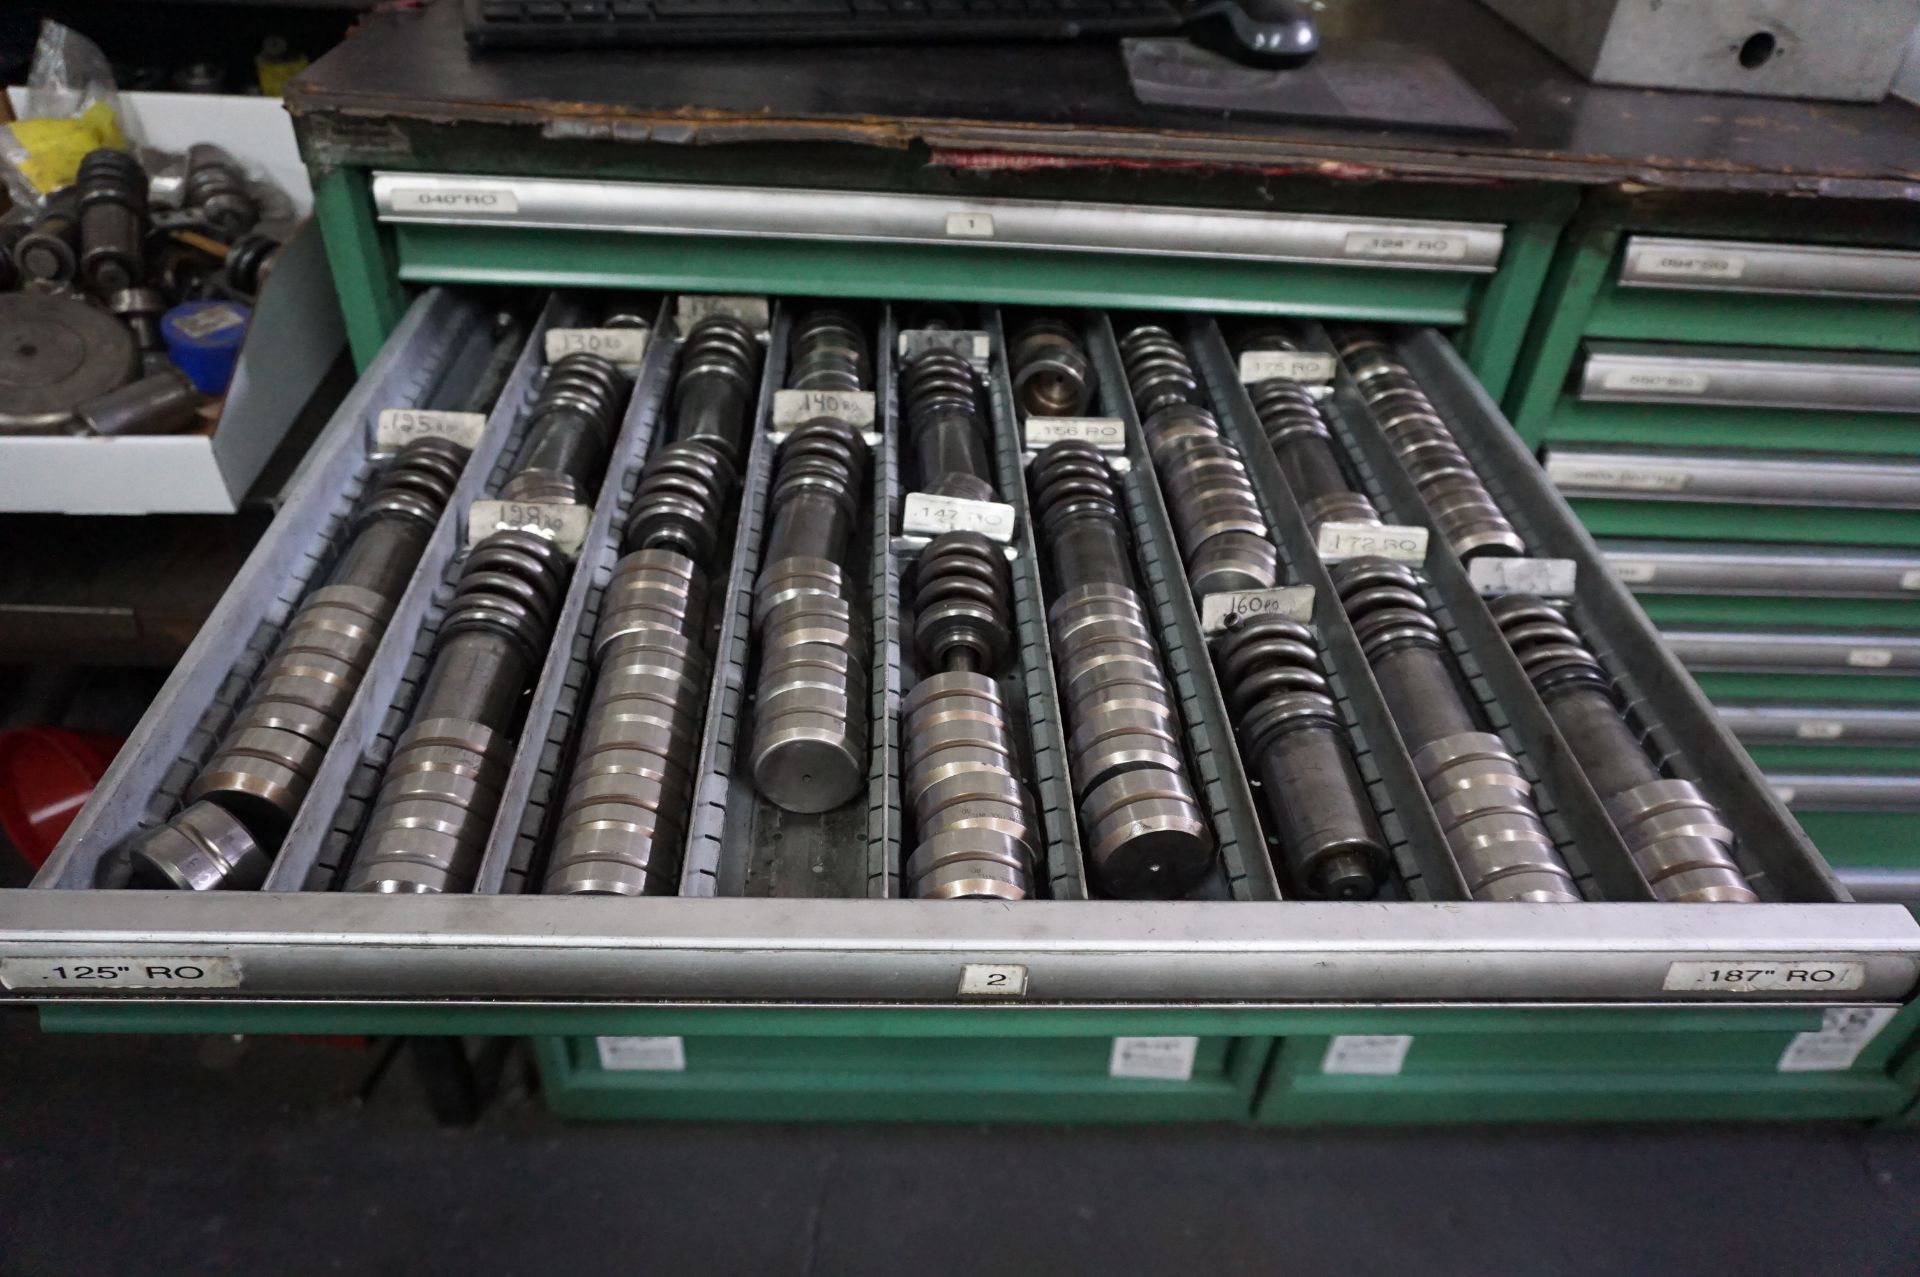 CONTENTS OF 9 DRAWER CABINET TO INCLUDE: .040" ROUND PUNCHES - 1.250" ROUND PUNCH TOOLING 1 1/4" - Image 2 of 9